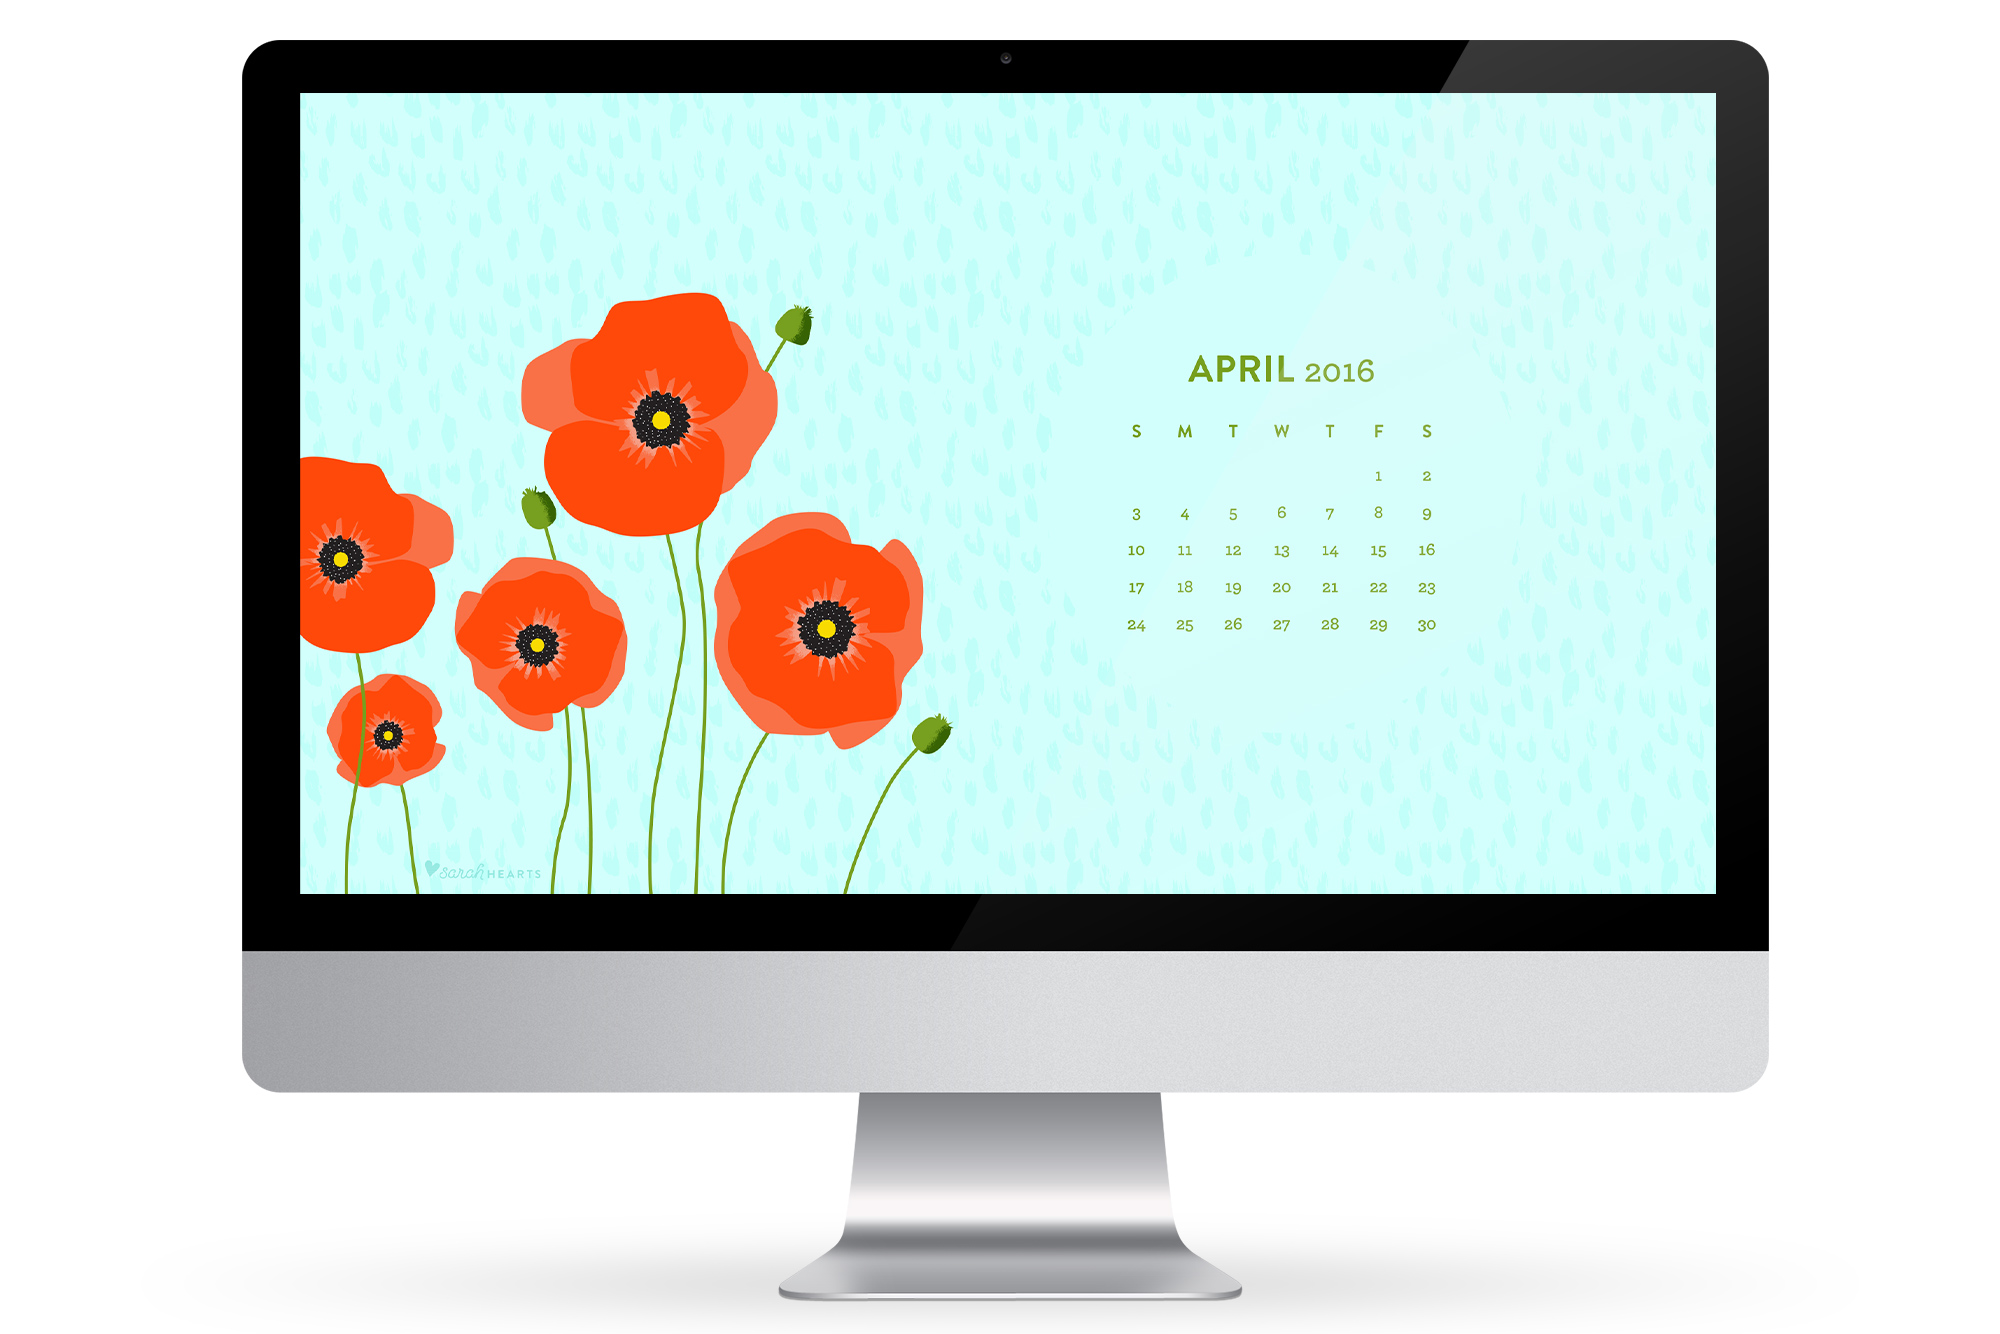  phone or tablet with this free April calendar wallpaper